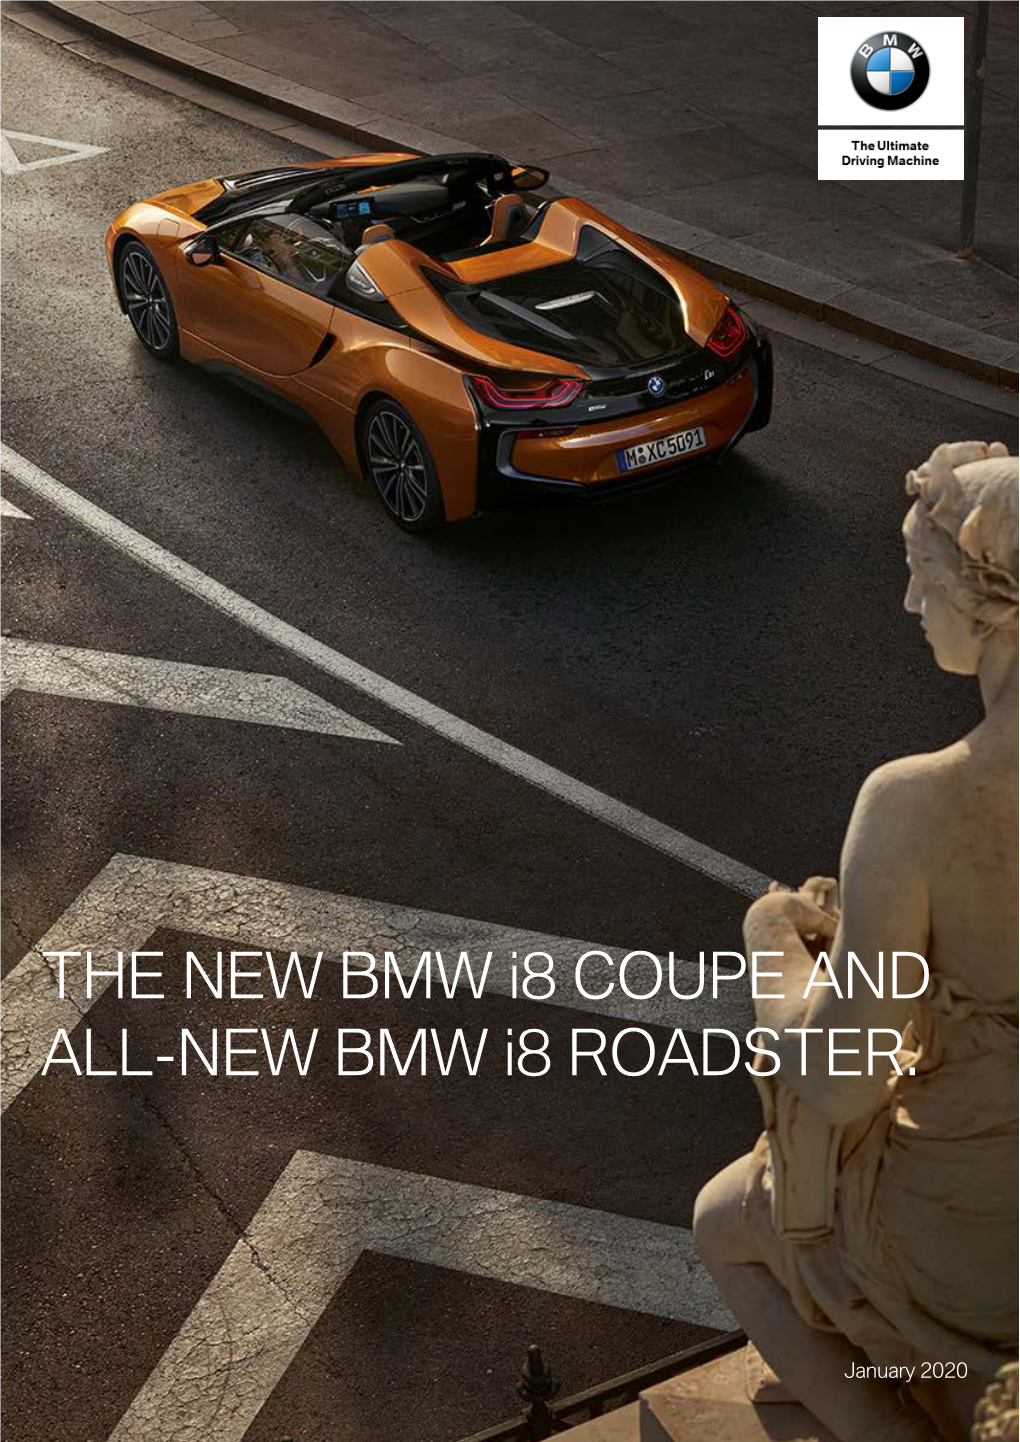 THE NEW BMW I8 COUPE and ALL-NEW BMW I8 ROADSTER